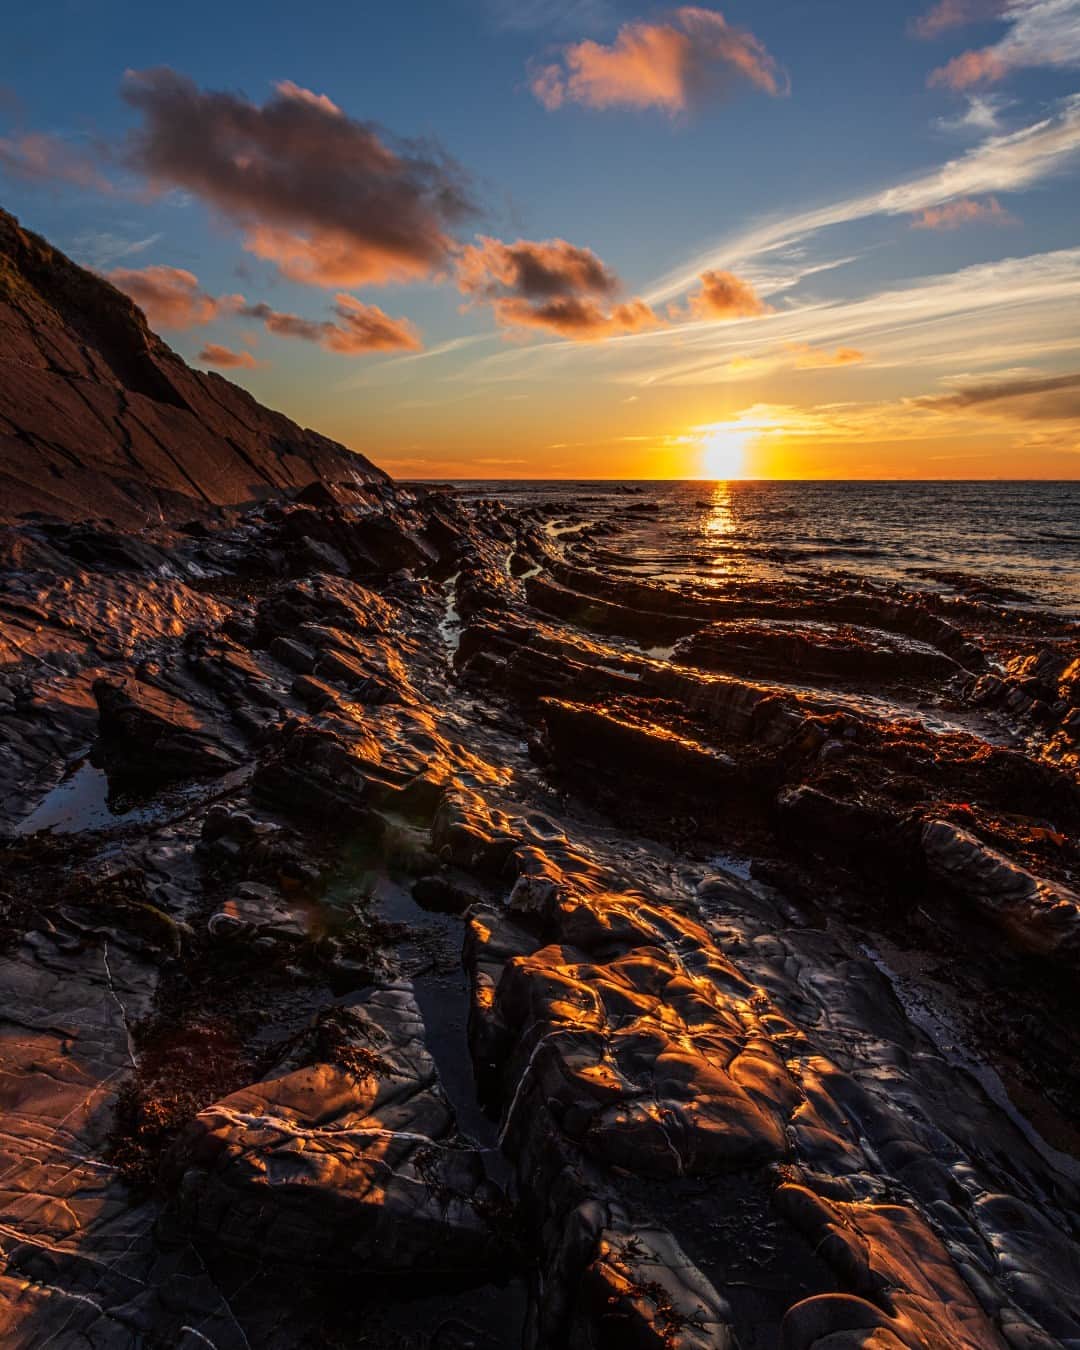 Canon UKのインスタグラム：「What a stunning beach shot 🌊👌  @nikkispikkies captured this beautiful sunset at Crackington Haven, North Cornwall.  Camera: EOS 7D Mark II Lens: EF-S 10-18mm f/4.5-5.6 IS STM Shutter Speed: 1/80, Aperture: f/13, ISO 200  #canonuk #mycanon #canon_photography」